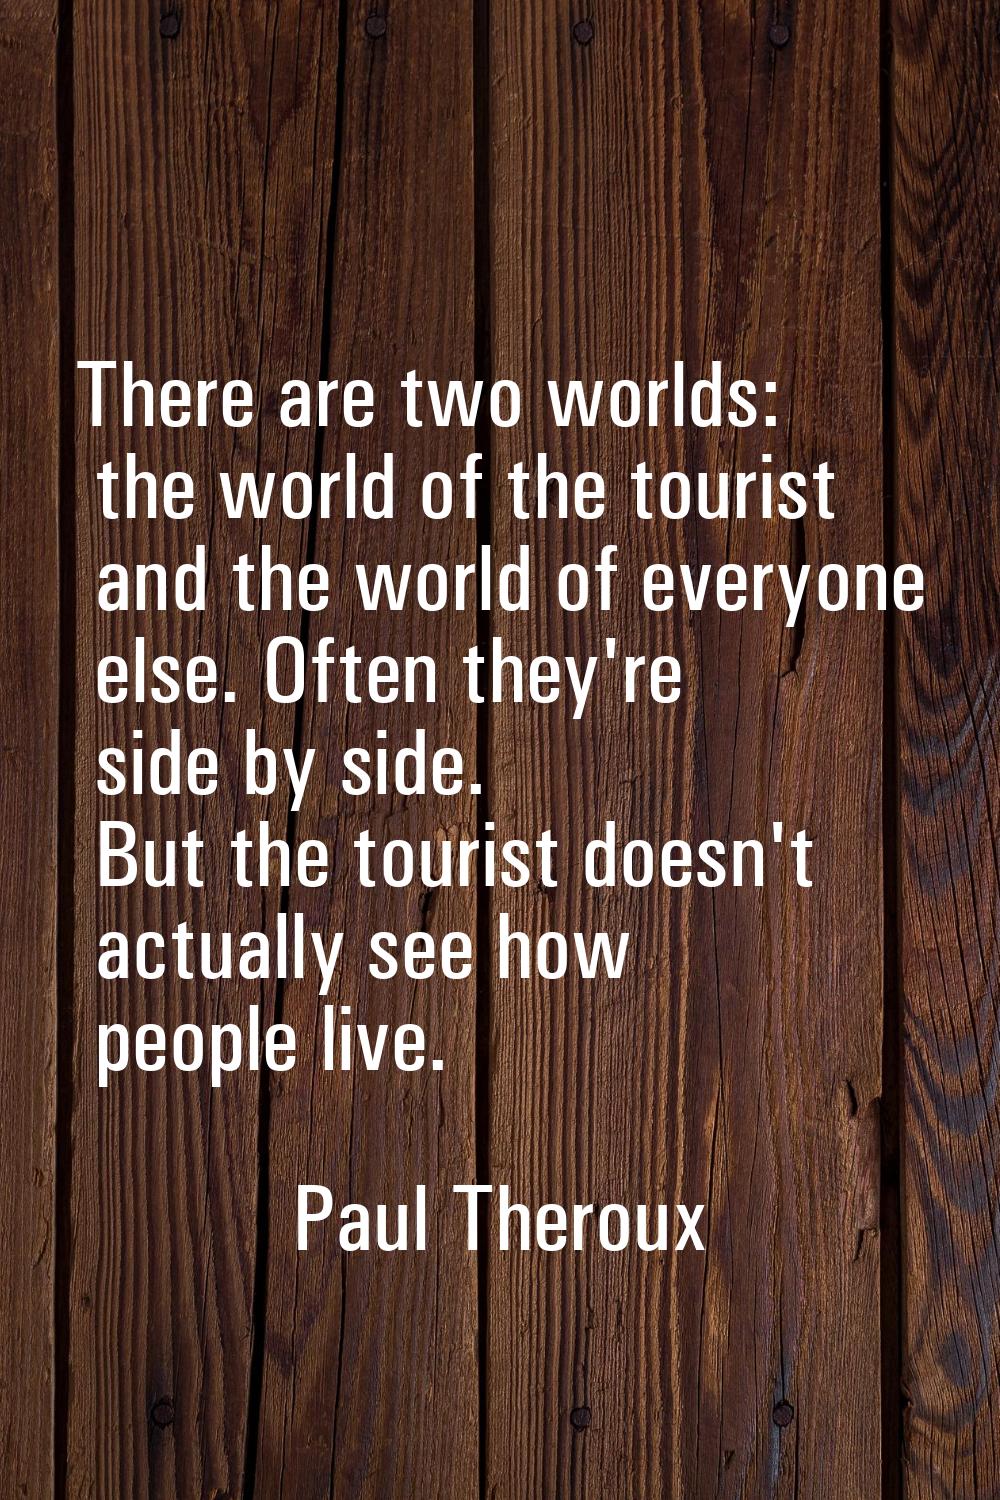 There are two worlds: the world of the tourist and the world of everyone else. Often they're side b